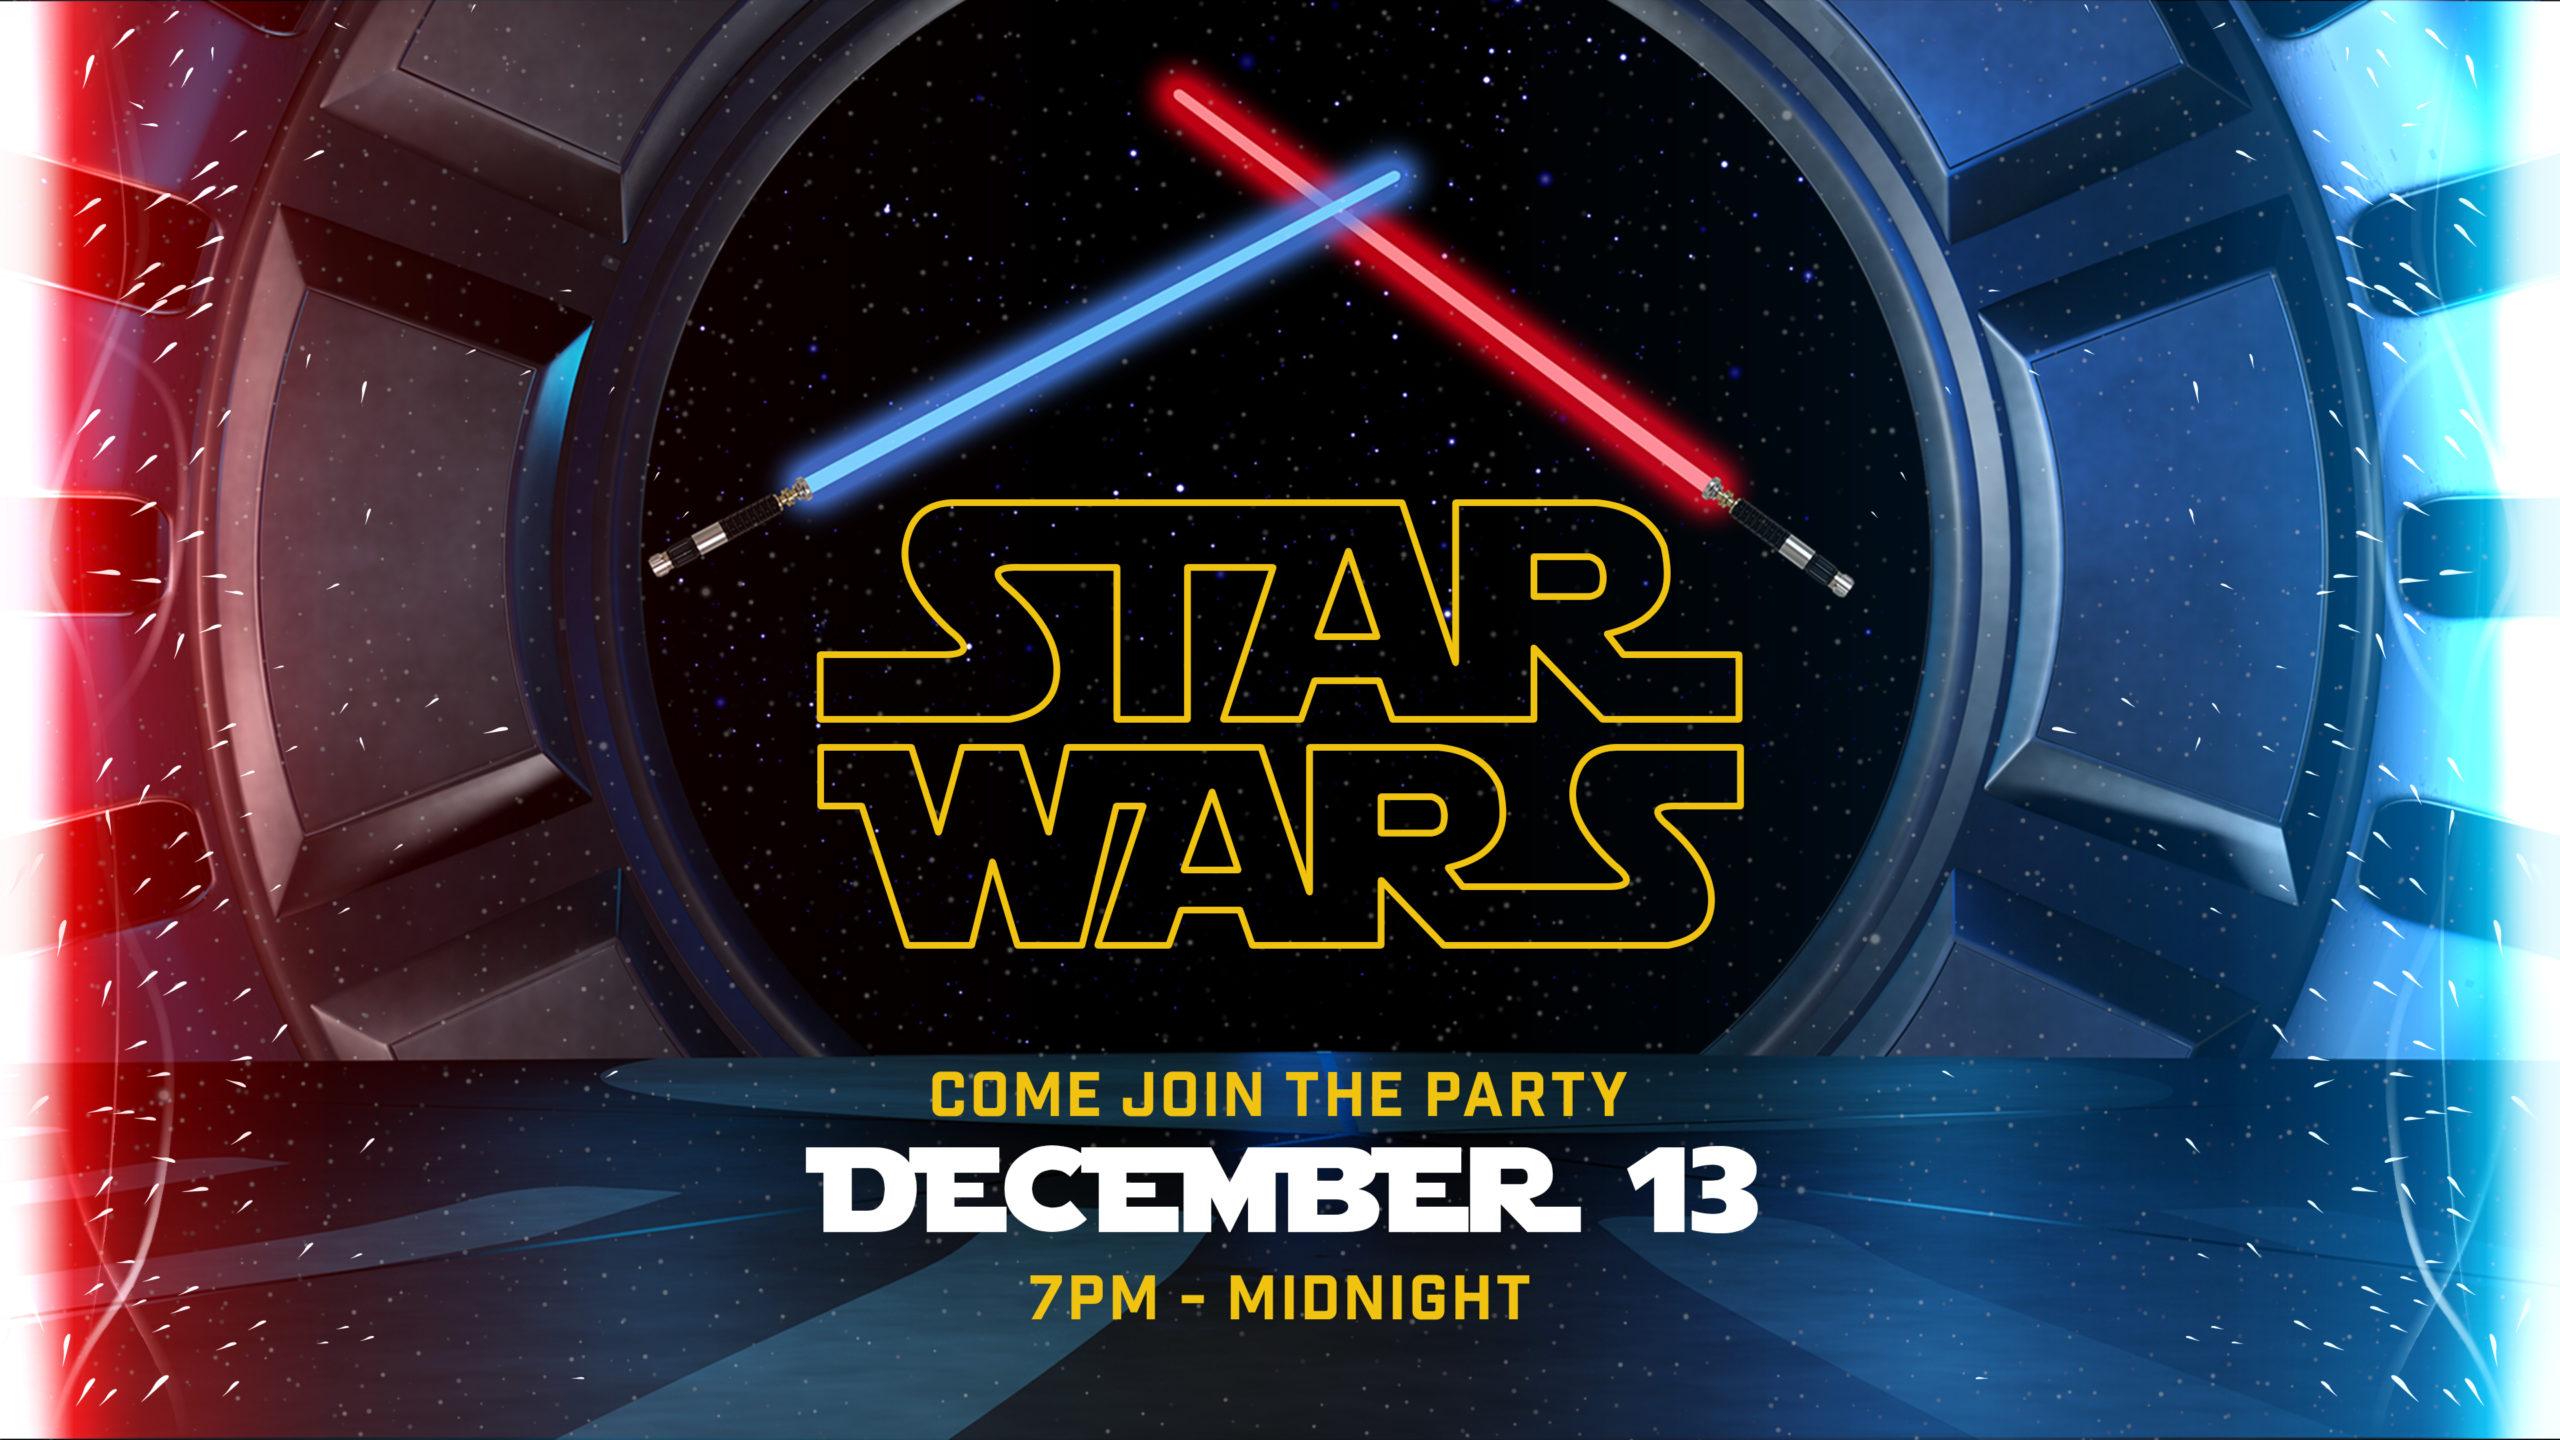 Star wars party event poster on december 13